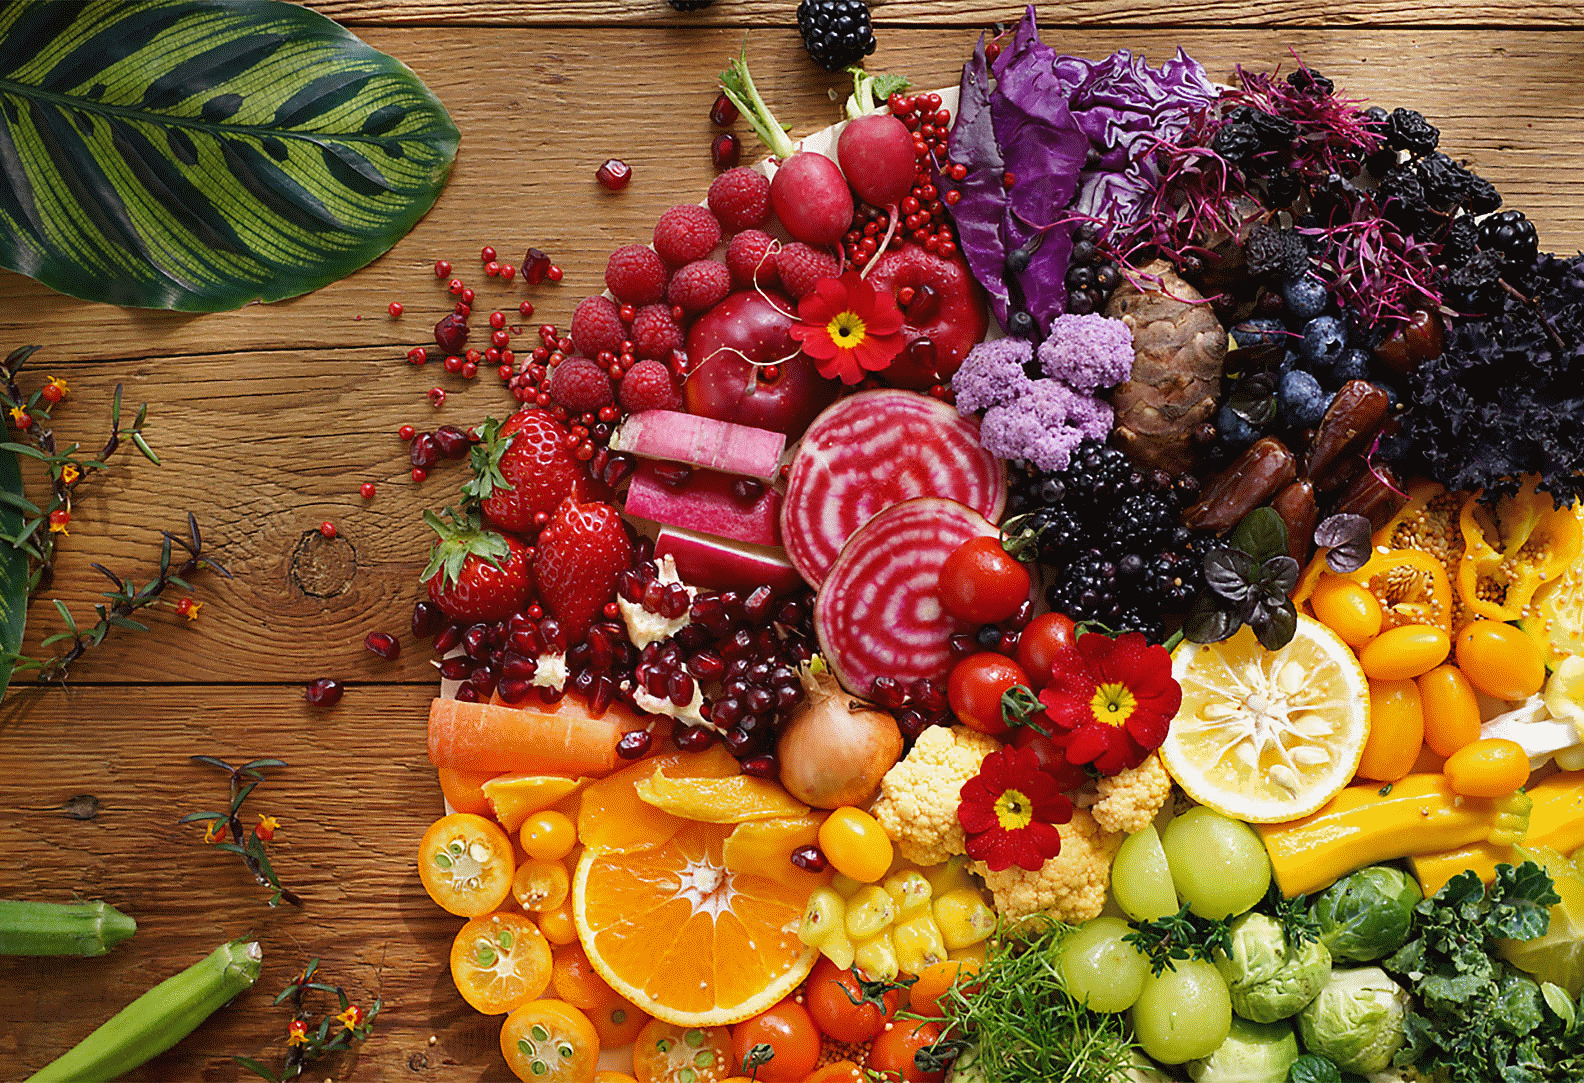 Image of colourful vegetables and fruits taken with this lens at high resolution in every corner